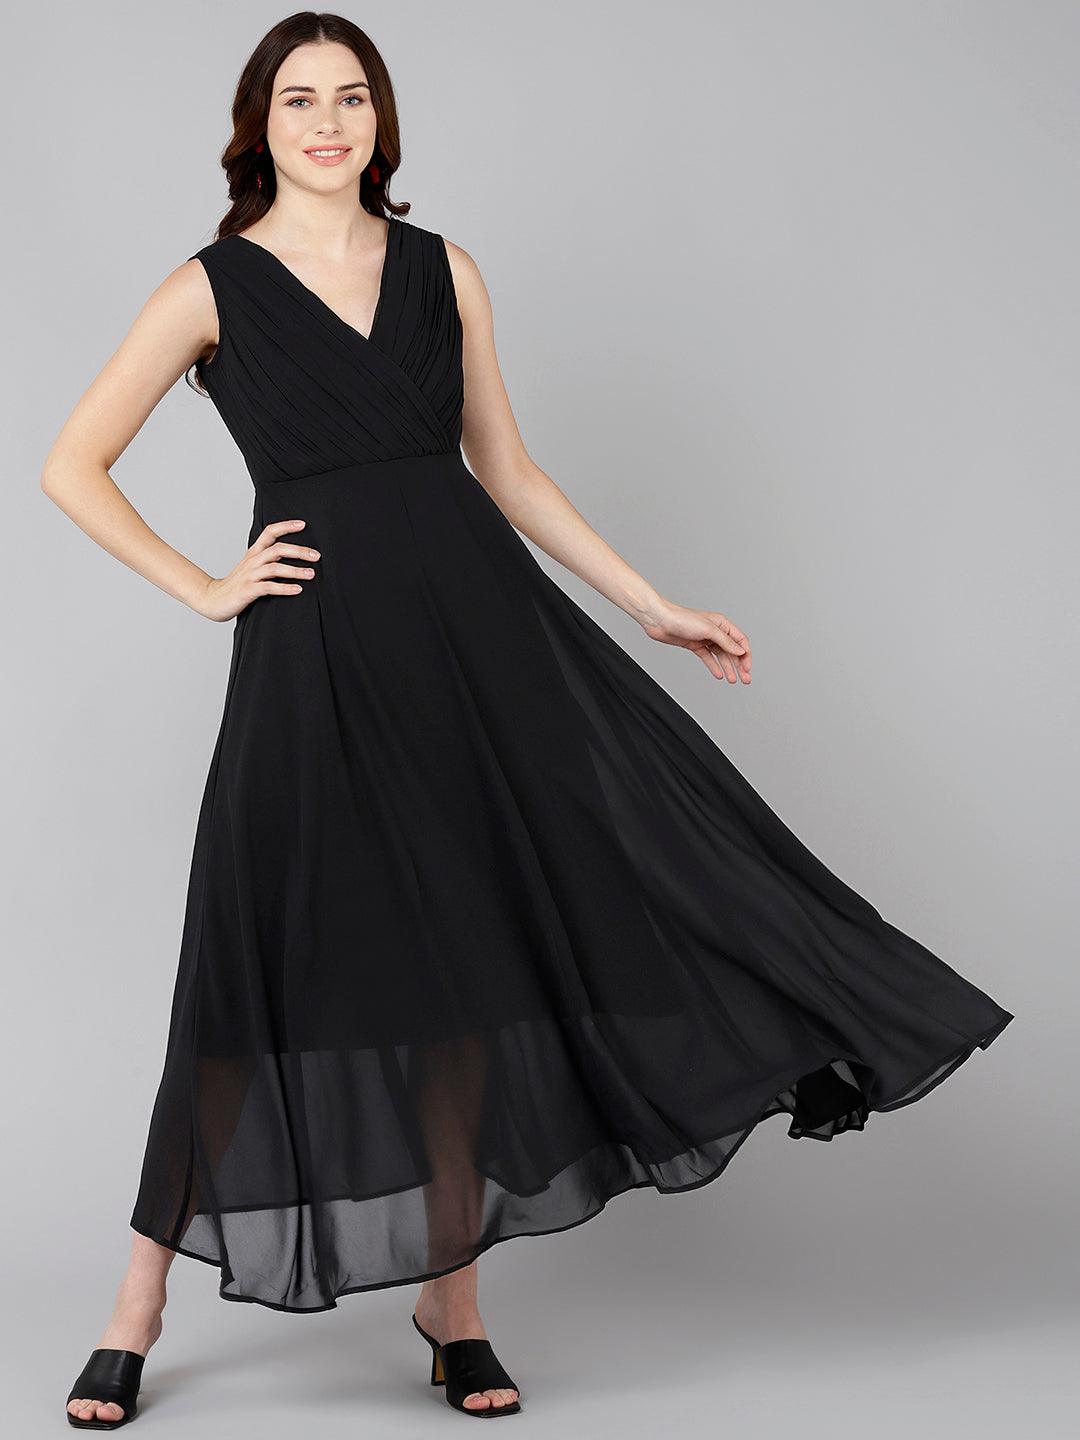 Solid Black Flared Dress - Znxclothing